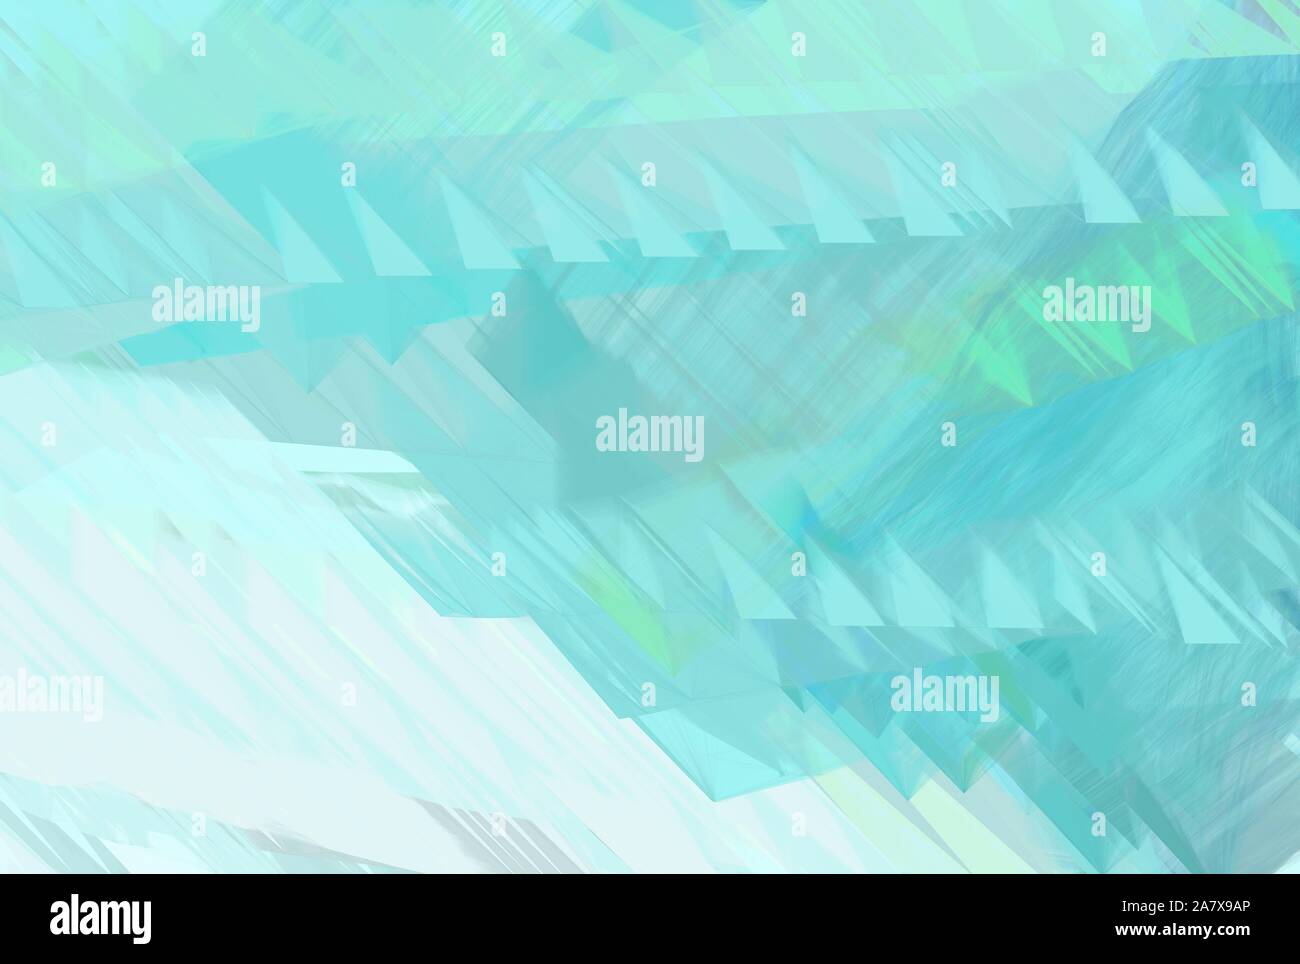 abstract futuristic line design with sky blue, light cyan and medium  turquoise color. can be used as wallpaper, texture or graphic background  Stock Photo - Alamy